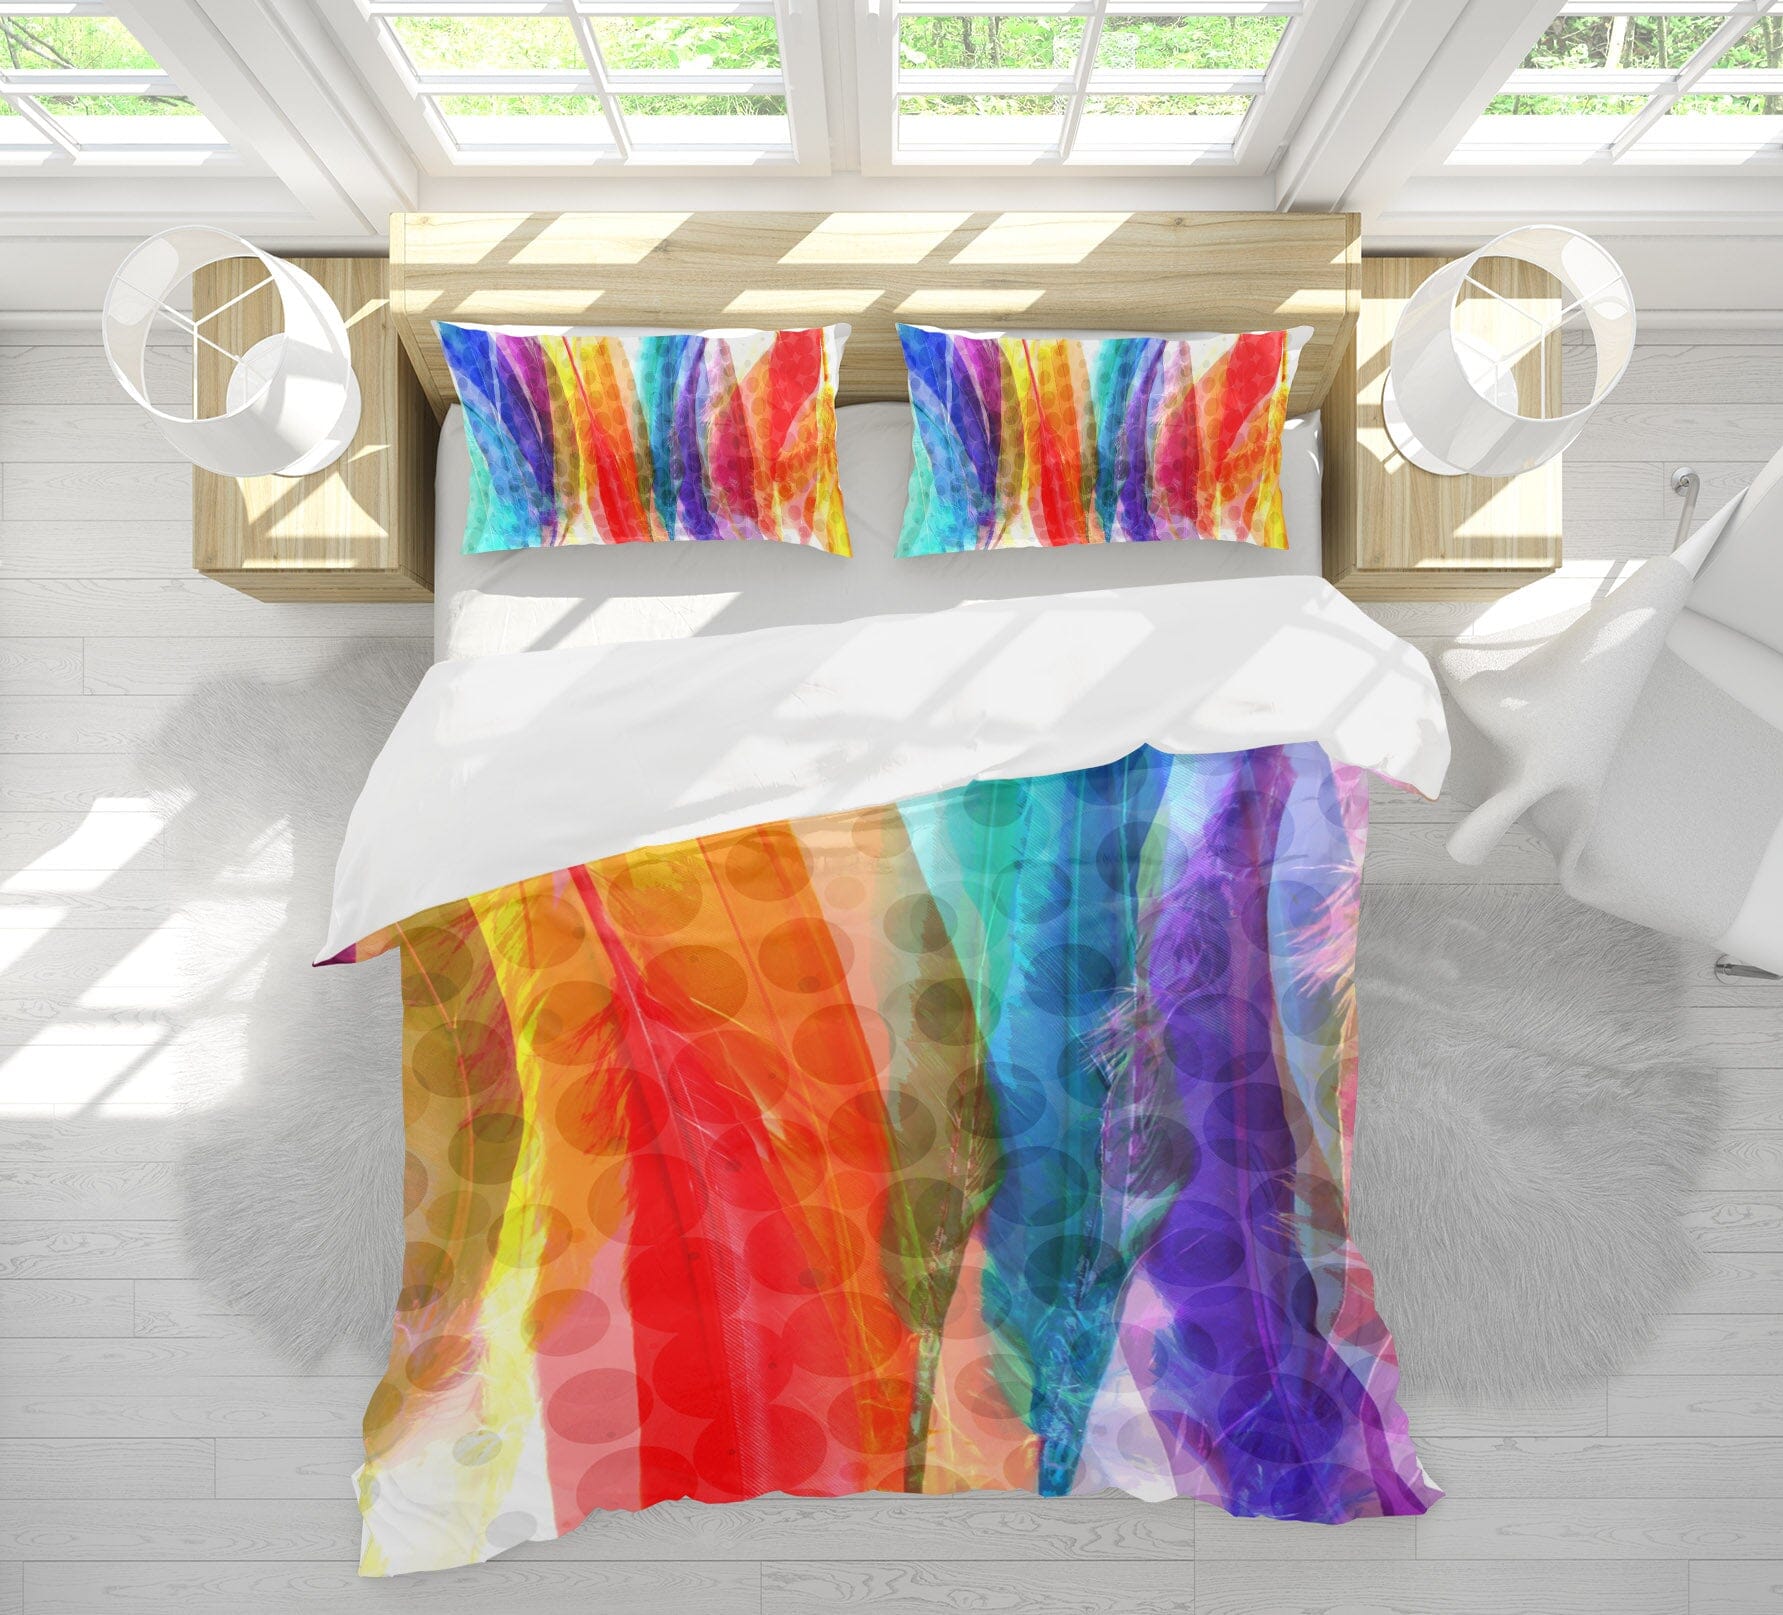 3D Dazzling Color 2005 Shandra Smith Bedding Bed Pillowcases Quilt Quiet Covers AJ Creativity Home 